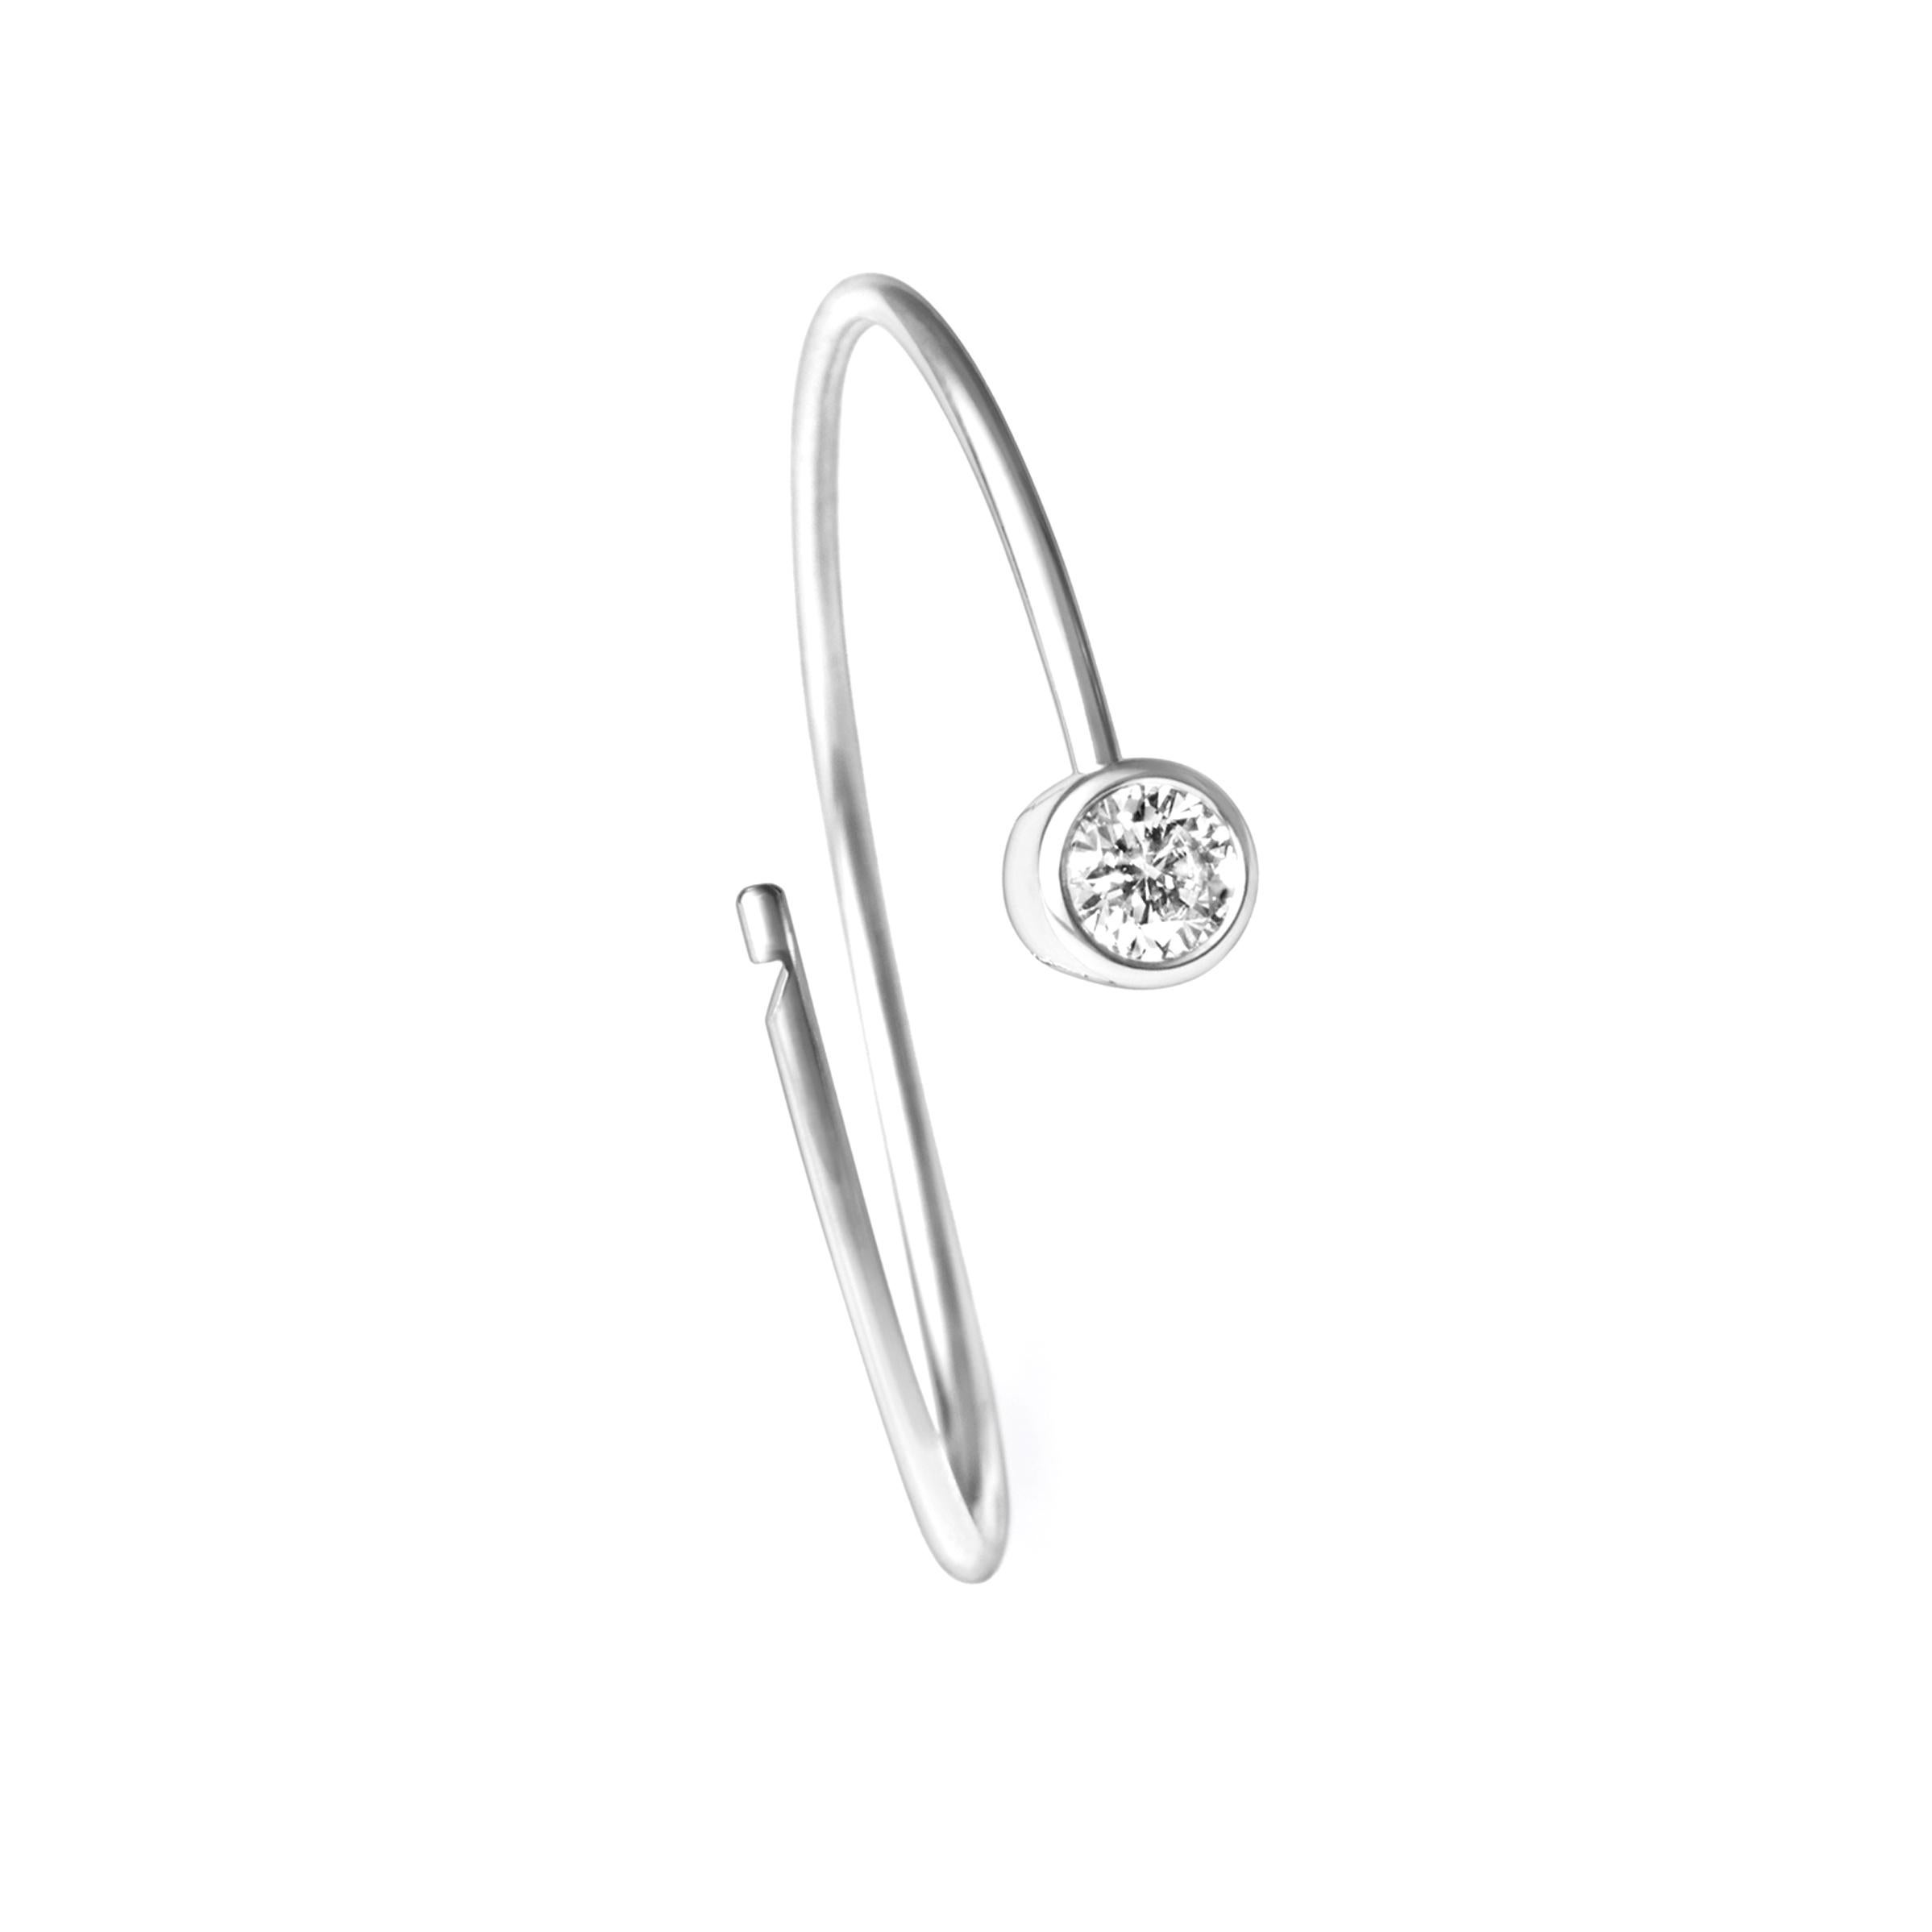 A single stone diamond hoop earring. The wire tension allows for a seamless circular post that hooks in place at the hidden clasp behind the stone.

Diamond size 0.1ct
Setting diameter: 4mm
Hoop diameter 22mm
Wire width 0.9mm
This item is sold as a